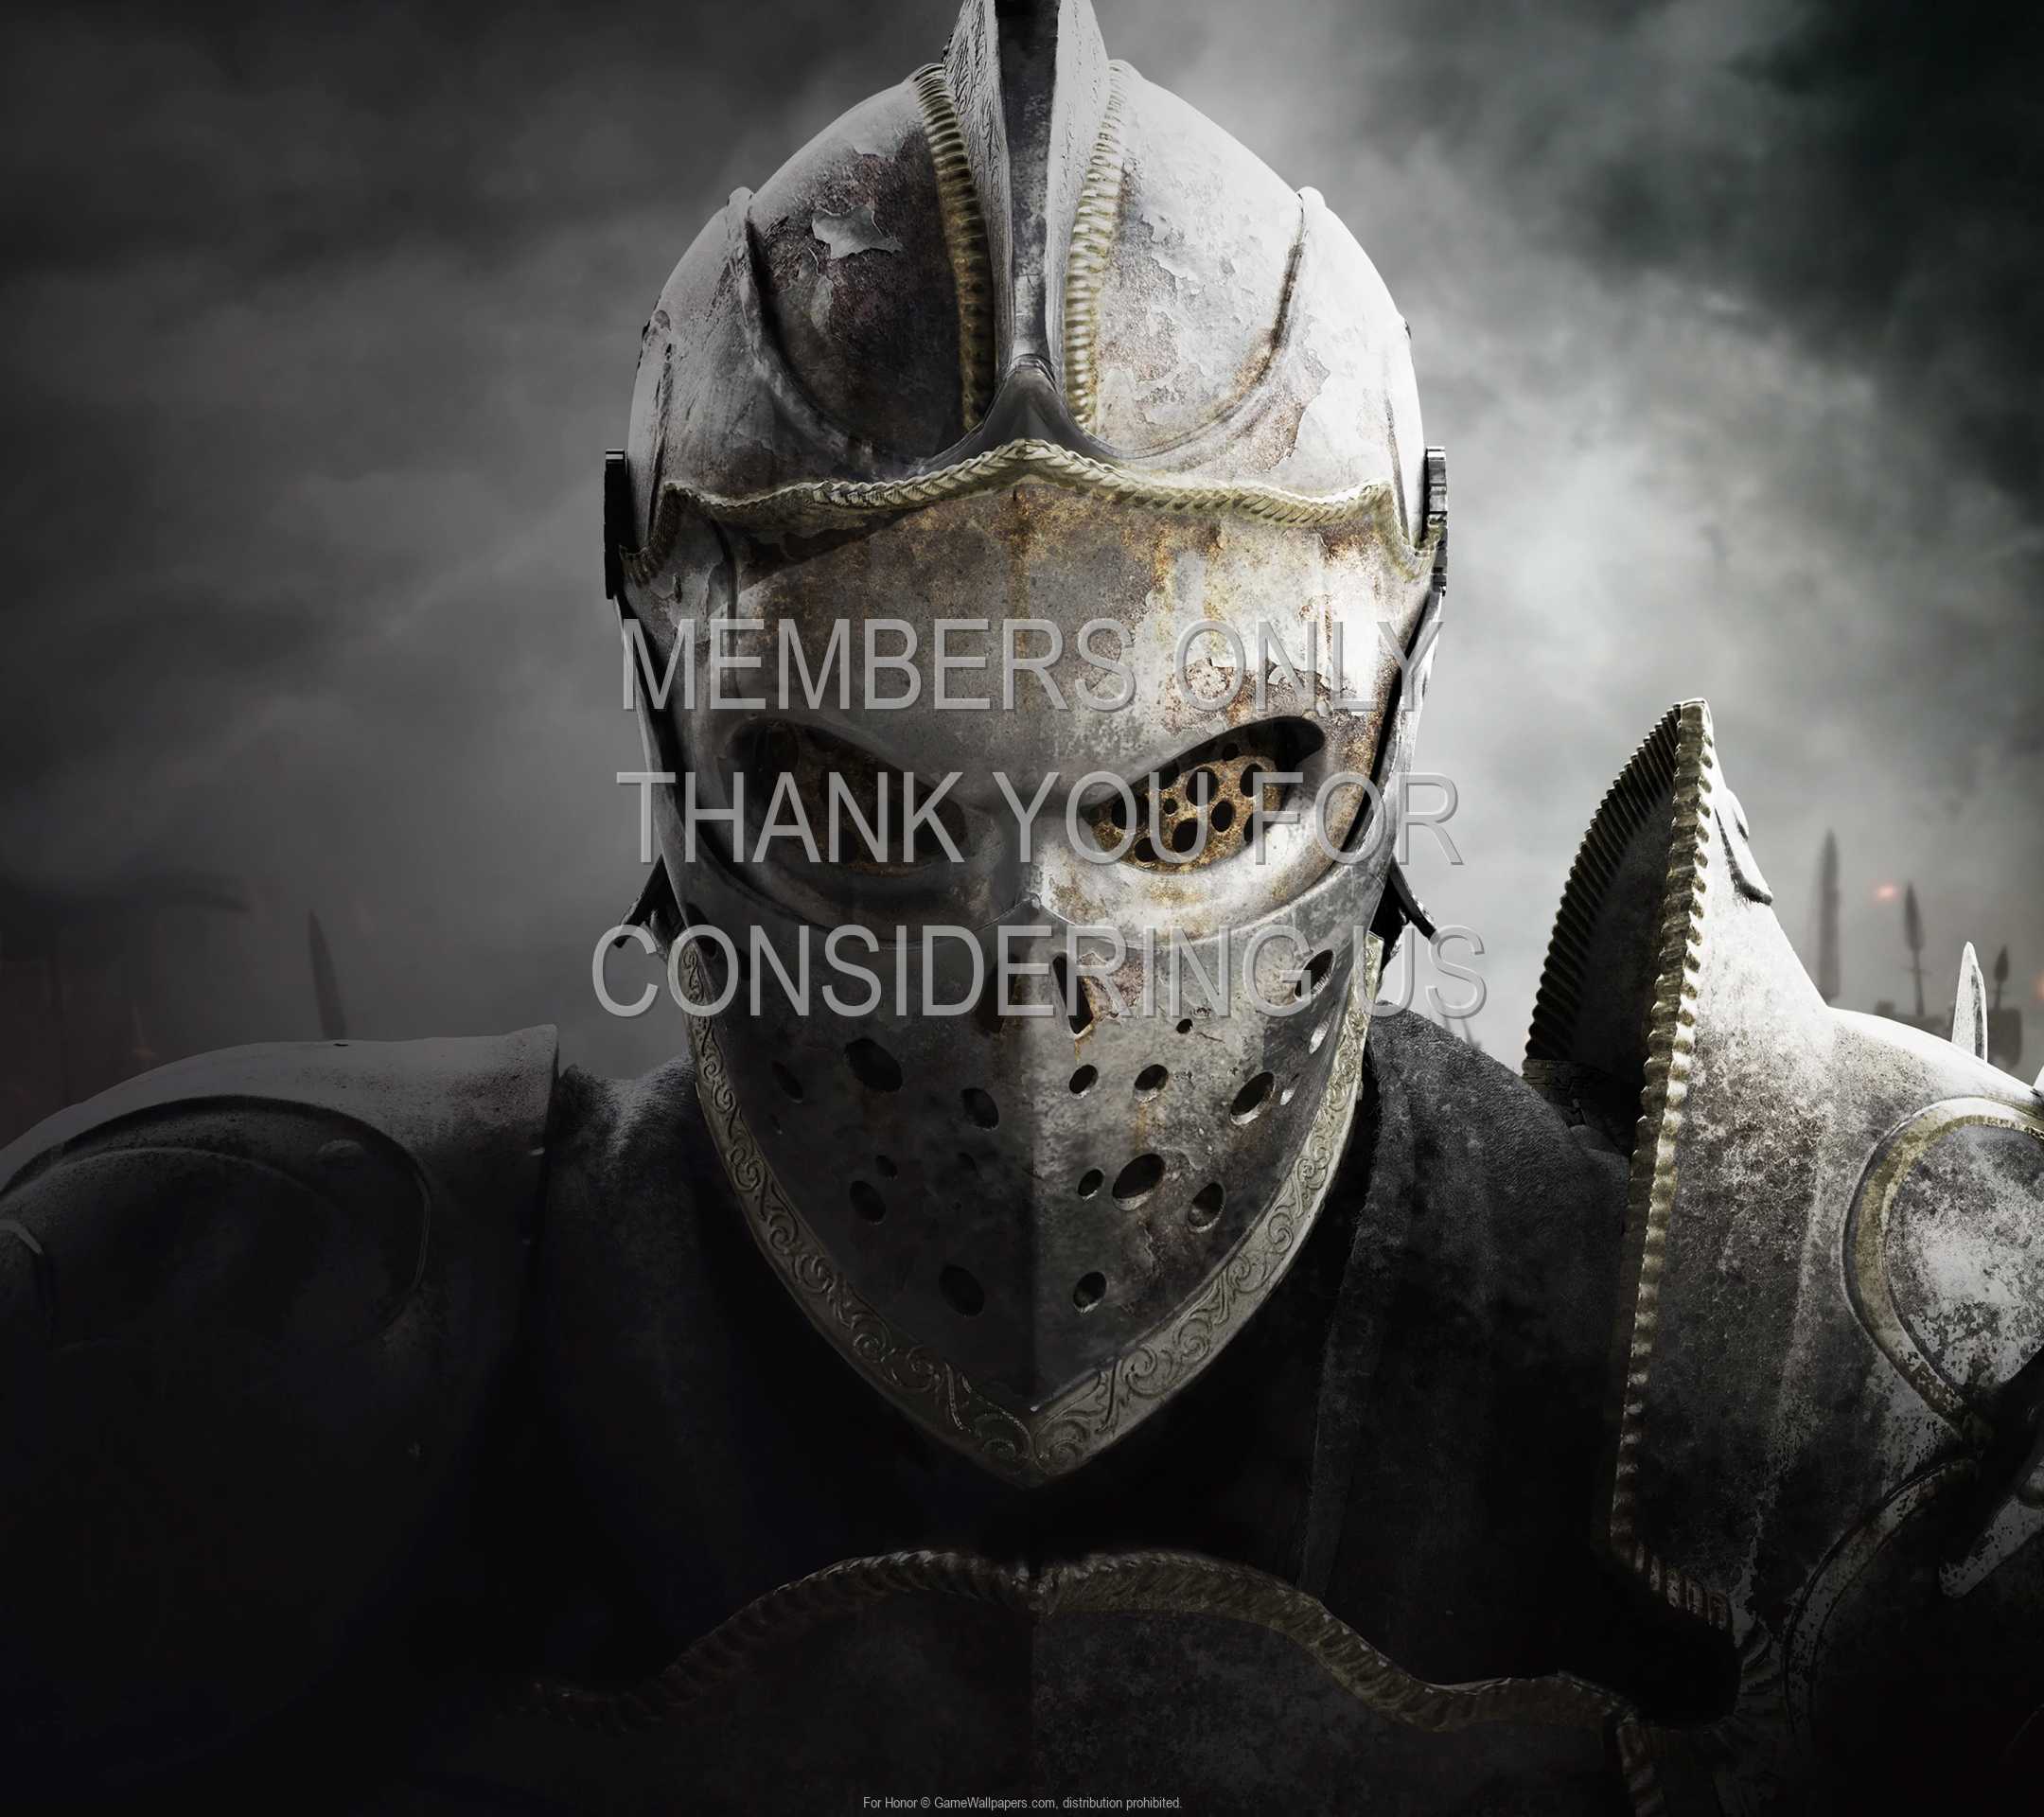 For Honor 1080p%20Horizontal Mobile wallpaper or background 29